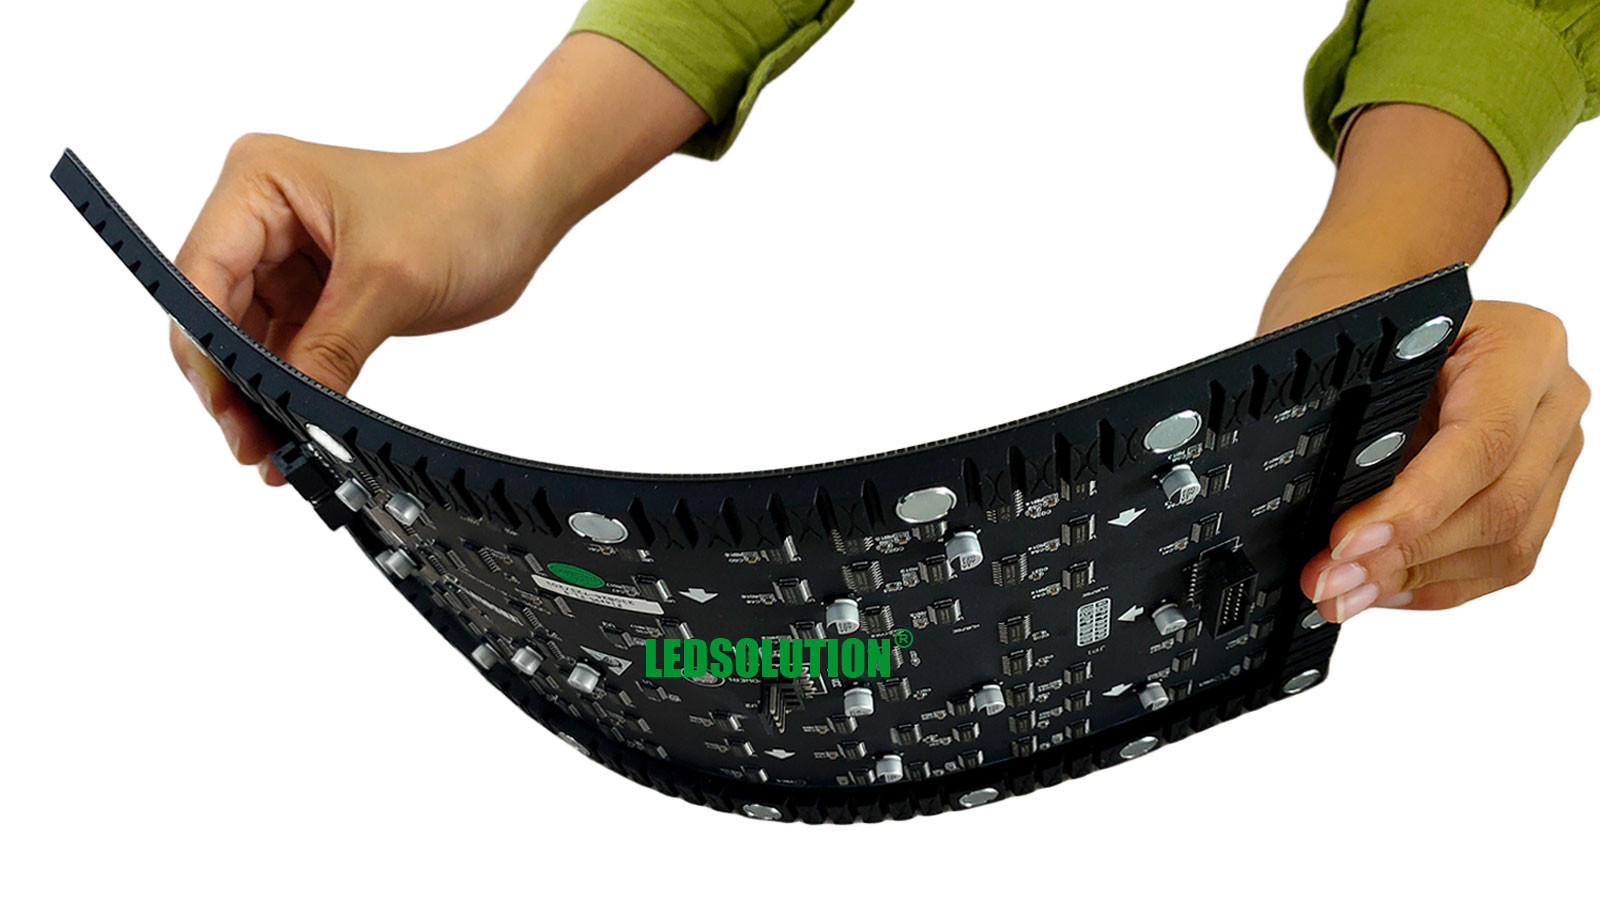 Flex95-Series-320x180mm-16to9-ratio-Flexible-LED-Module-for-concave-LED-Display